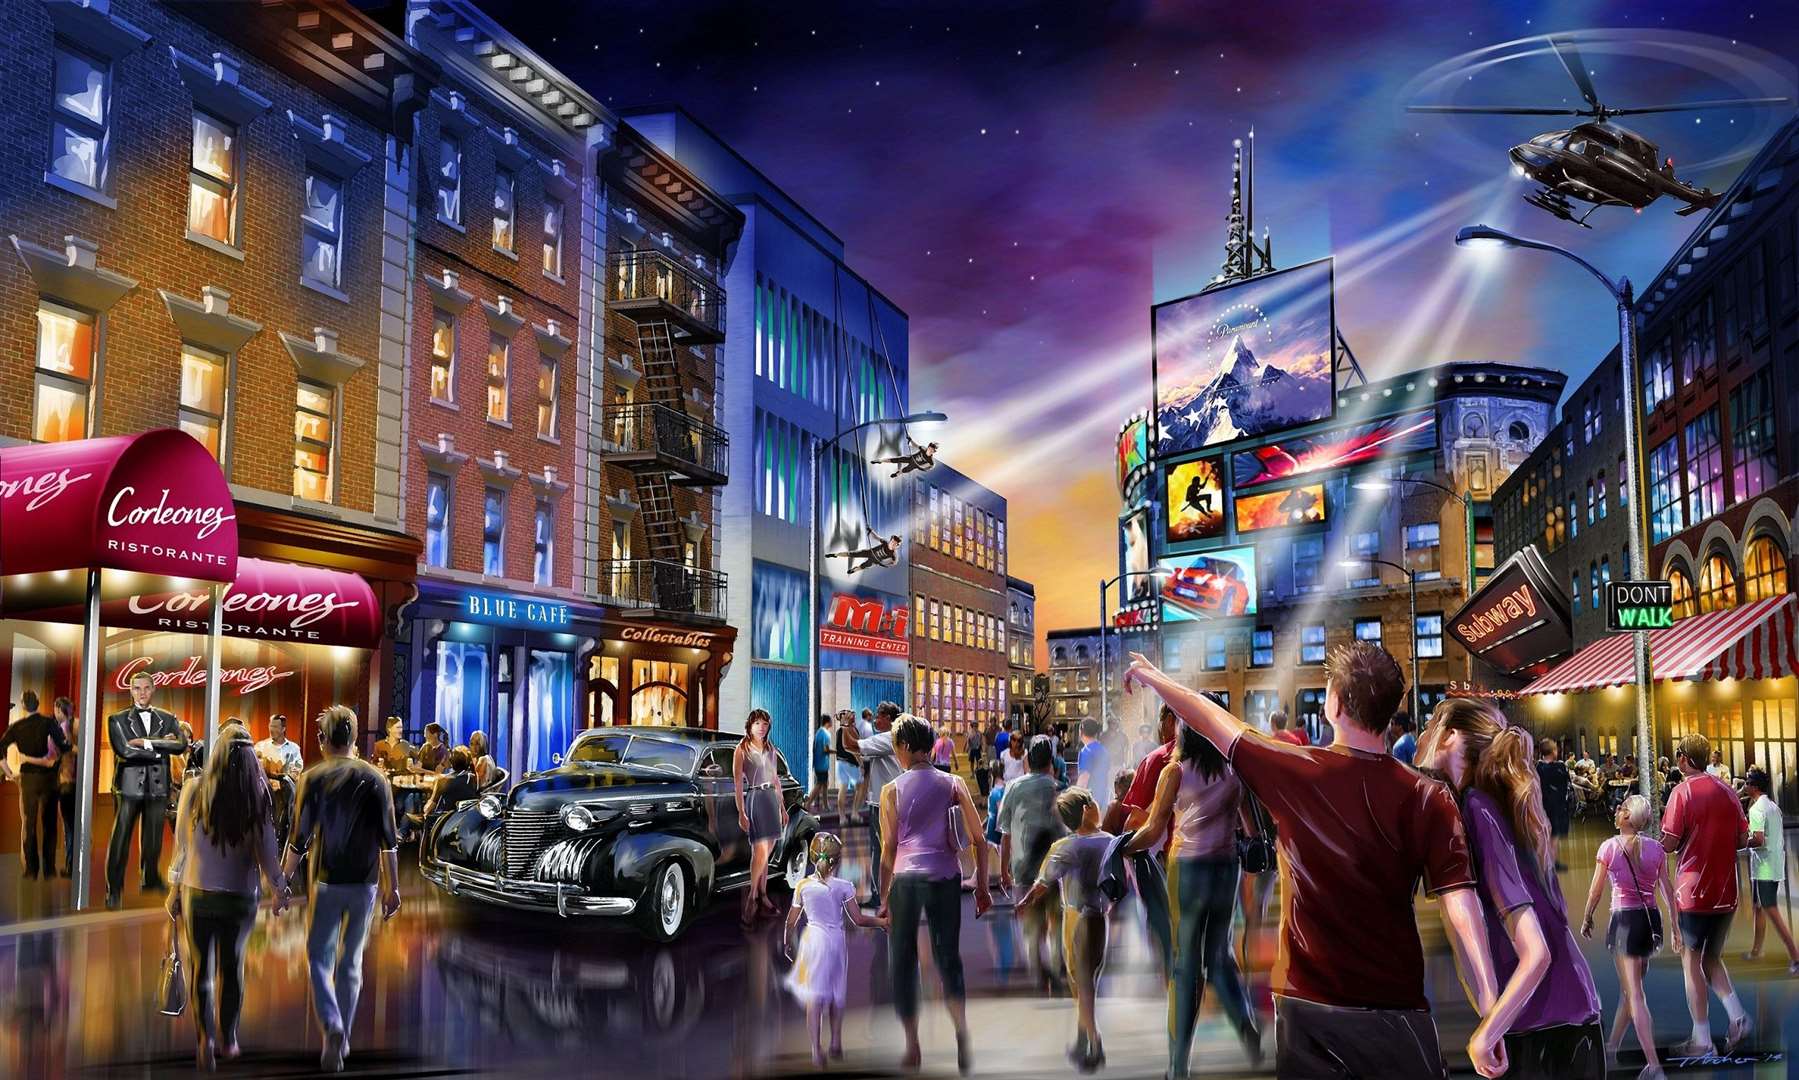 The £5 billion theme park is set to open in 2024